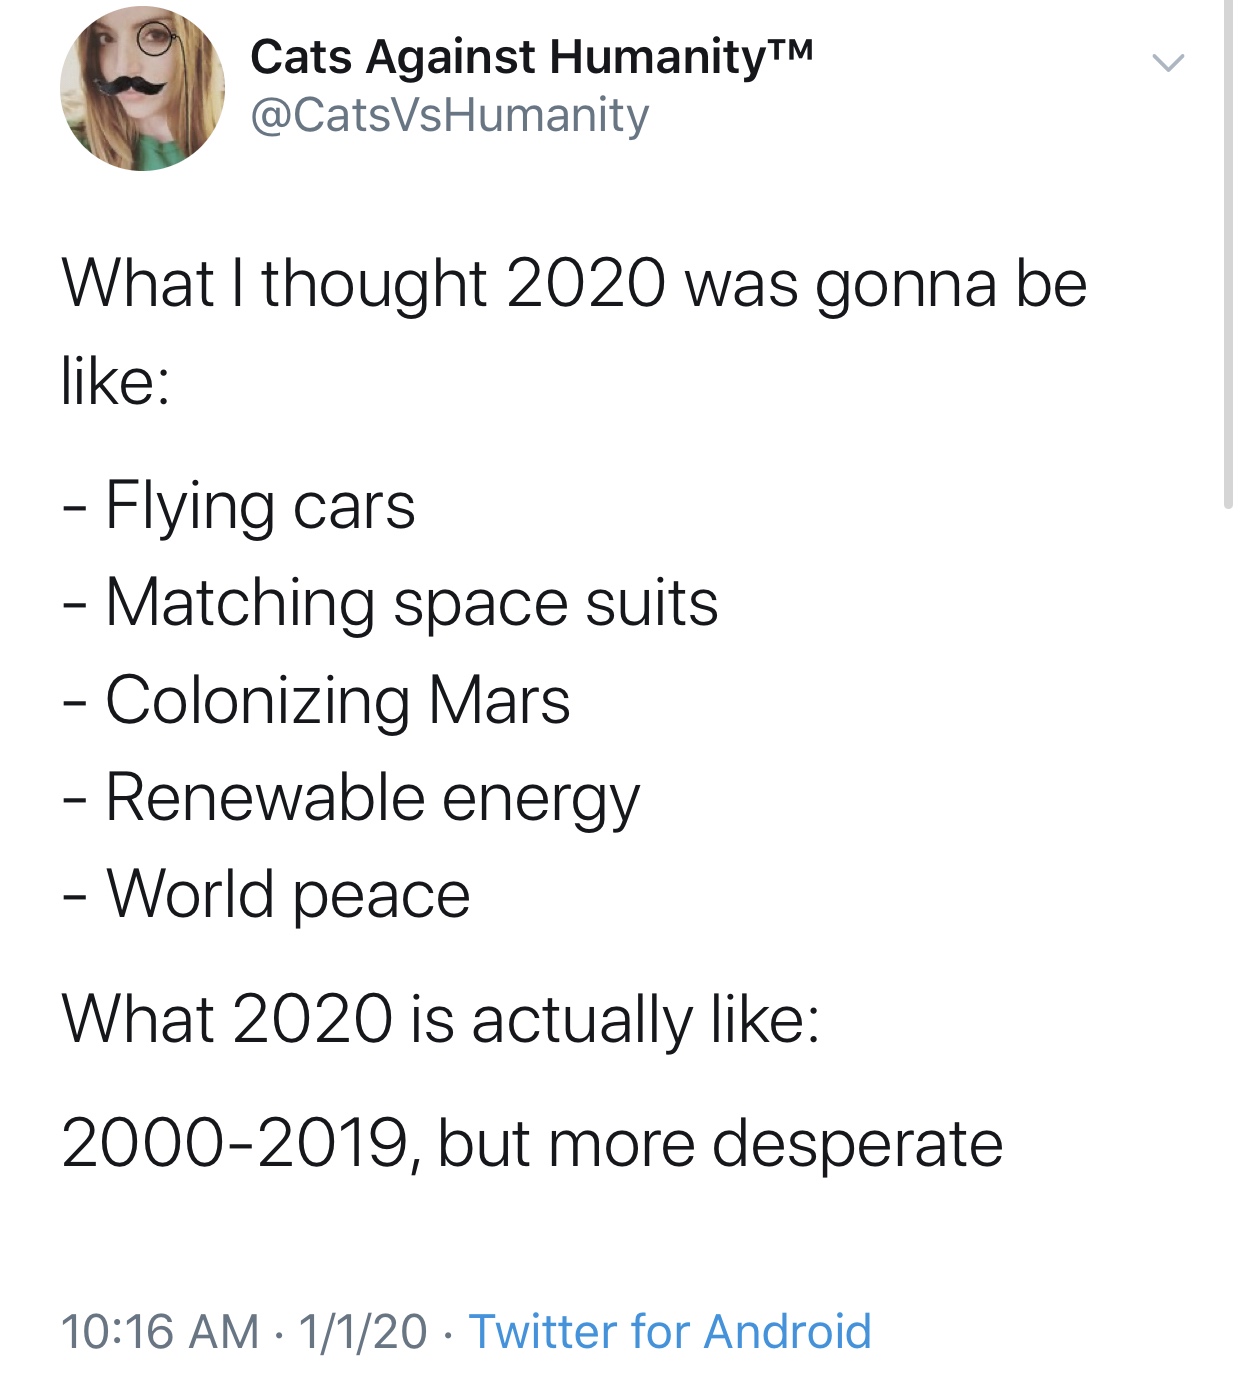 angle - Cats Against HumanityTM What I thought 2020 was gonna be Flying cars Matching space suits Colonizing Mars Renewable energy World peace What 2020 is actually 20002019, but more desperate 1120 Twitter for Android